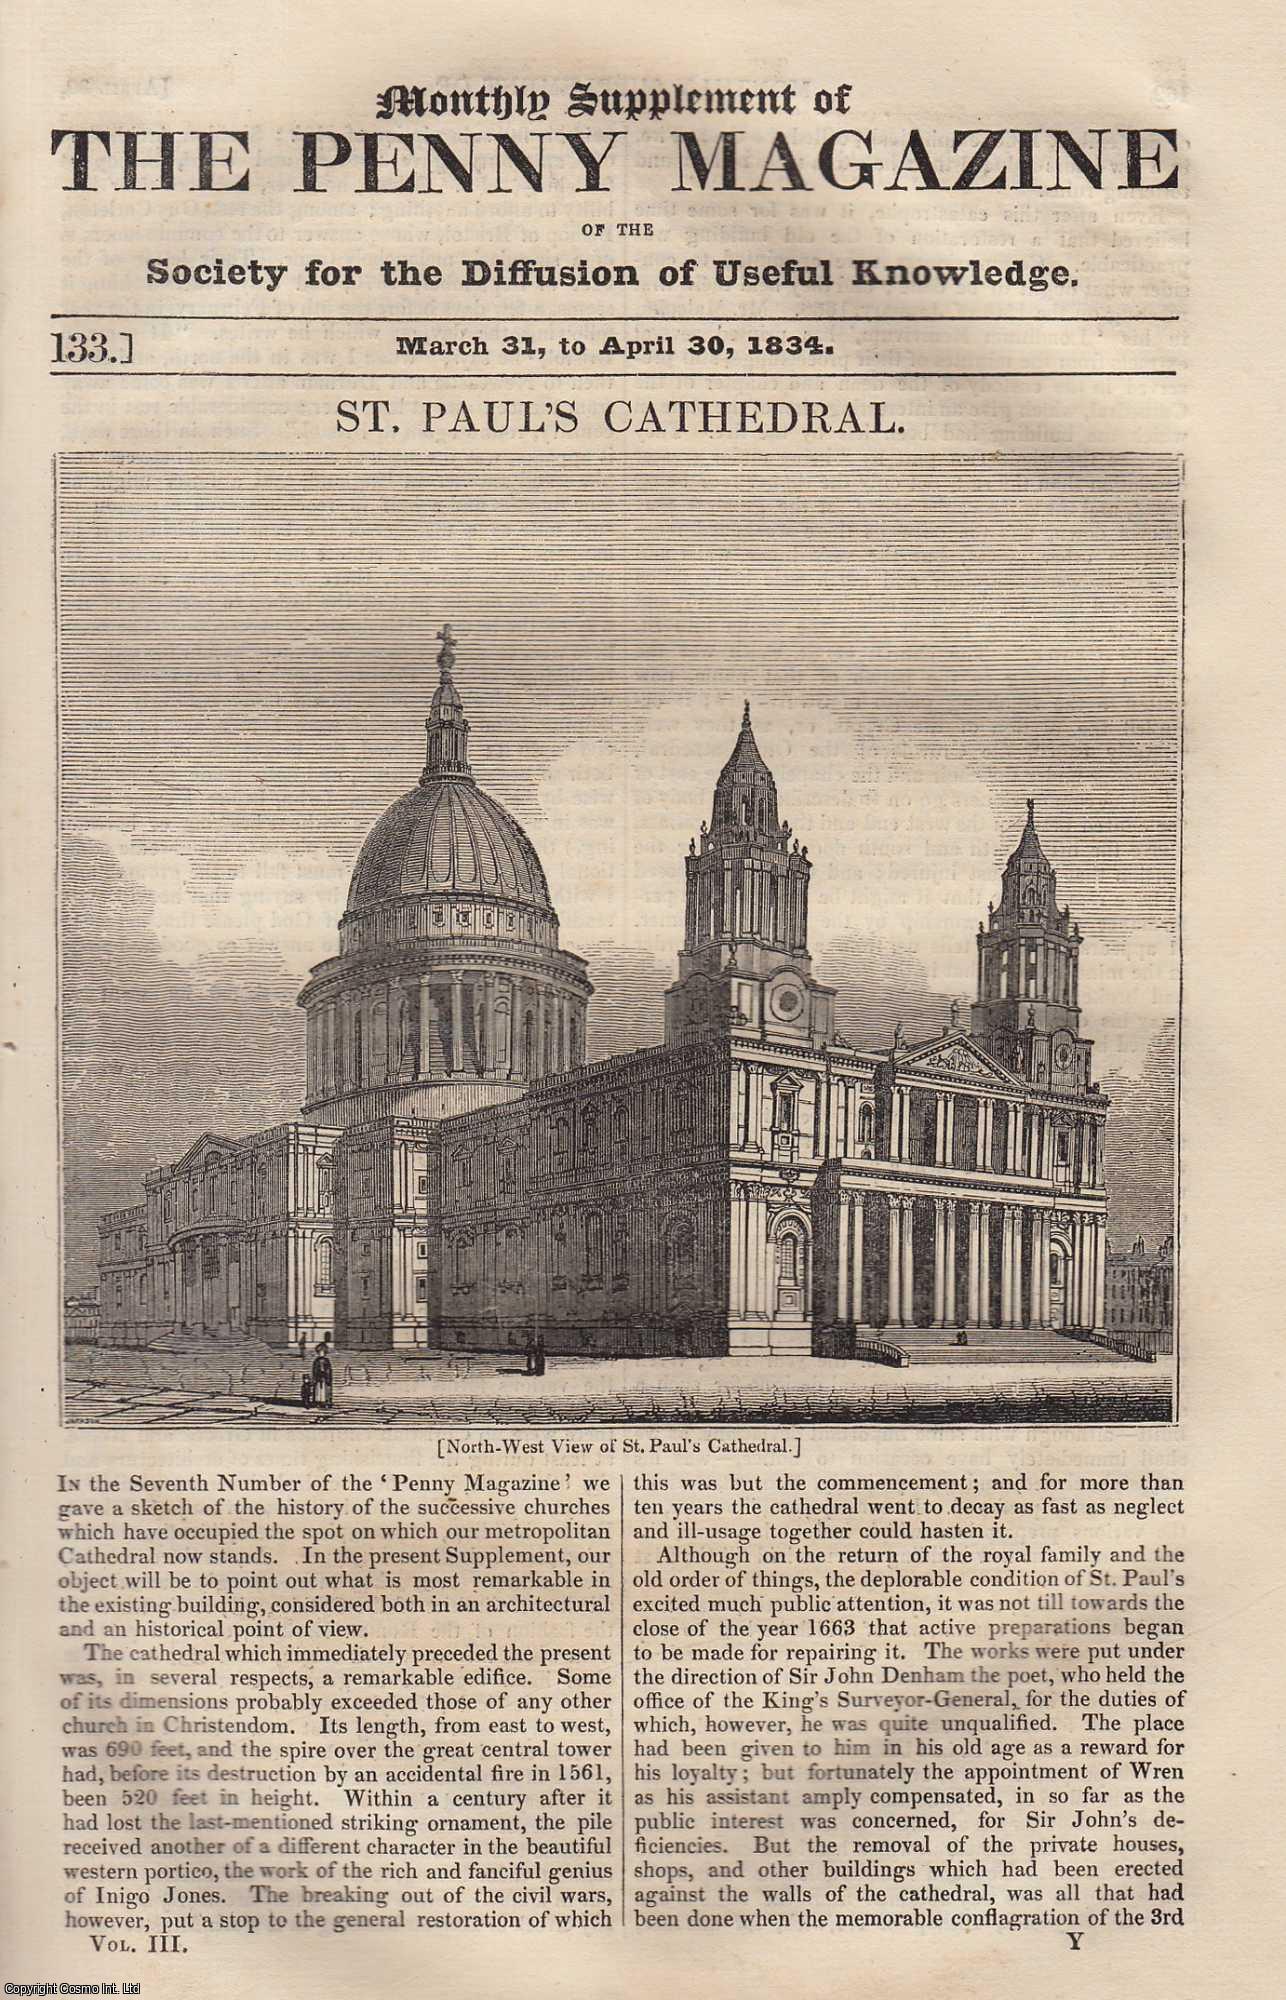 Penny Magazine - St. Paul's Cathedral, London, etc. Issue No. 133, March 31st to April 30th, 1834. A complete original weekly issue of the Penny Magazine, 1834.